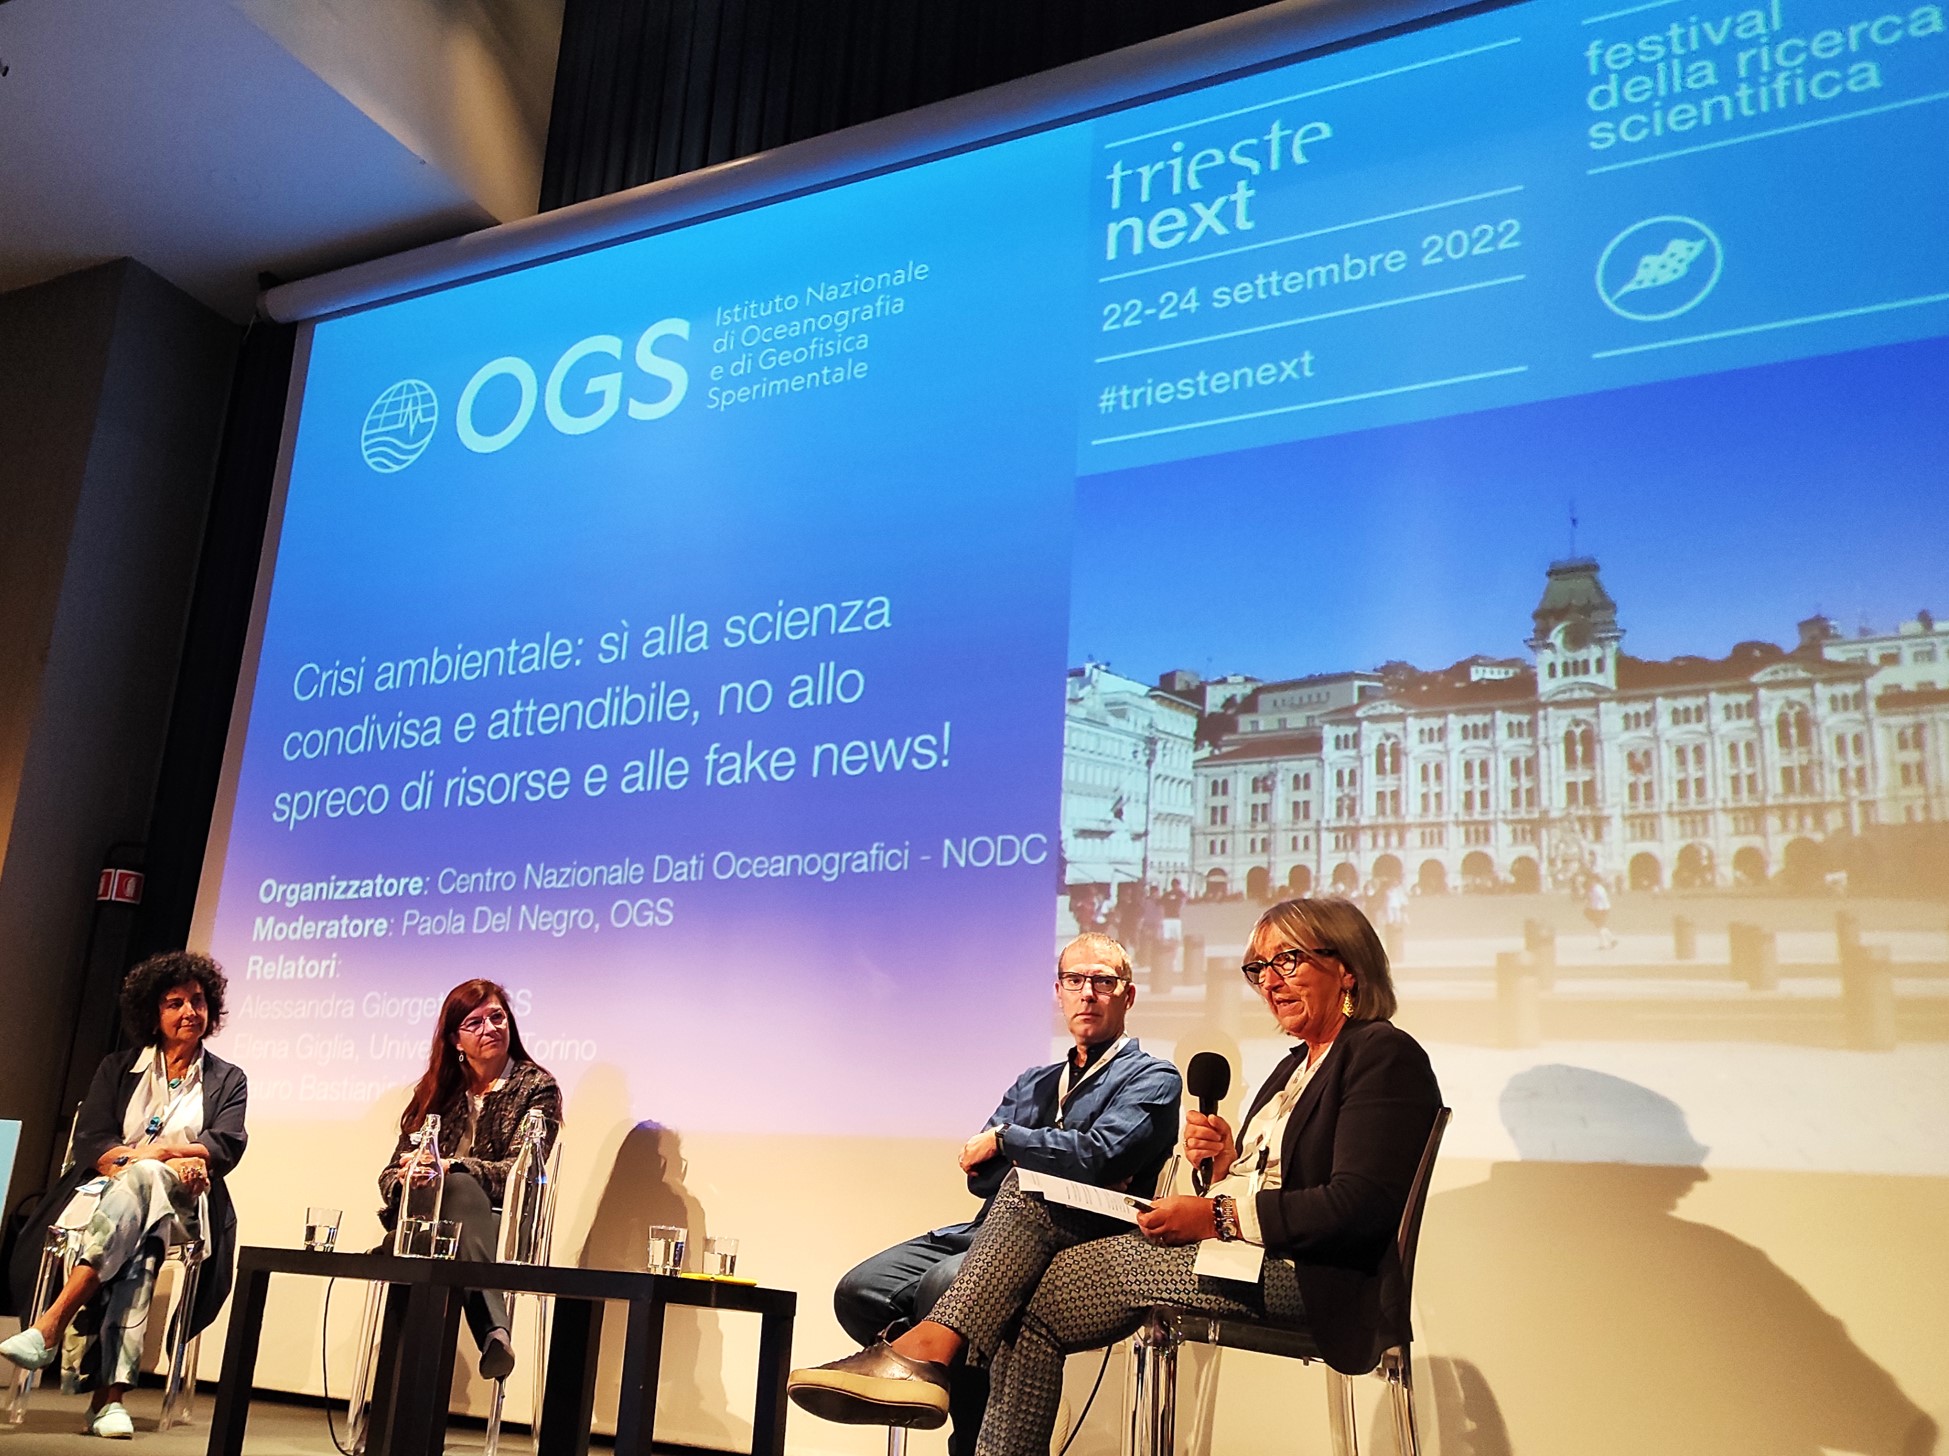 Trieste Next 2022: OGS and the value of Open Science